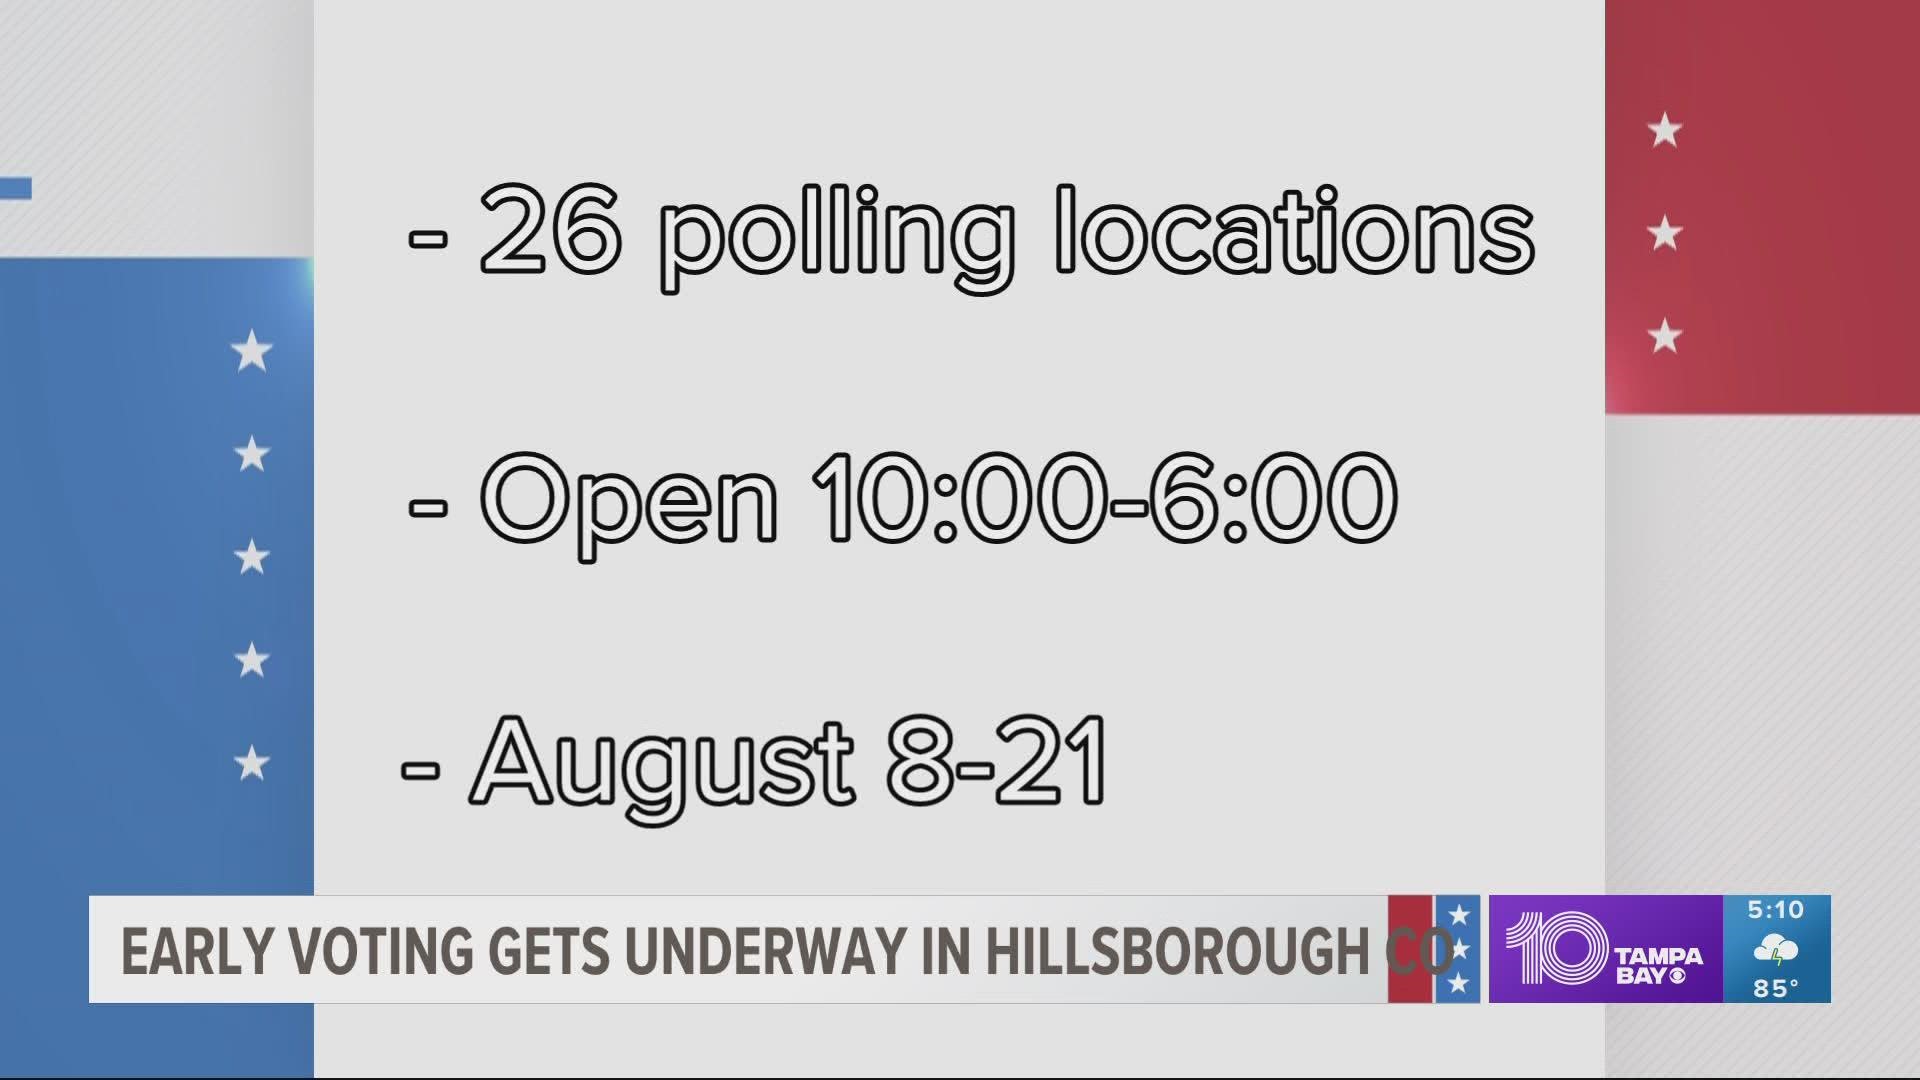 Early voting goes from 10 a.m. to 6 p.m. Aug. 8-21.